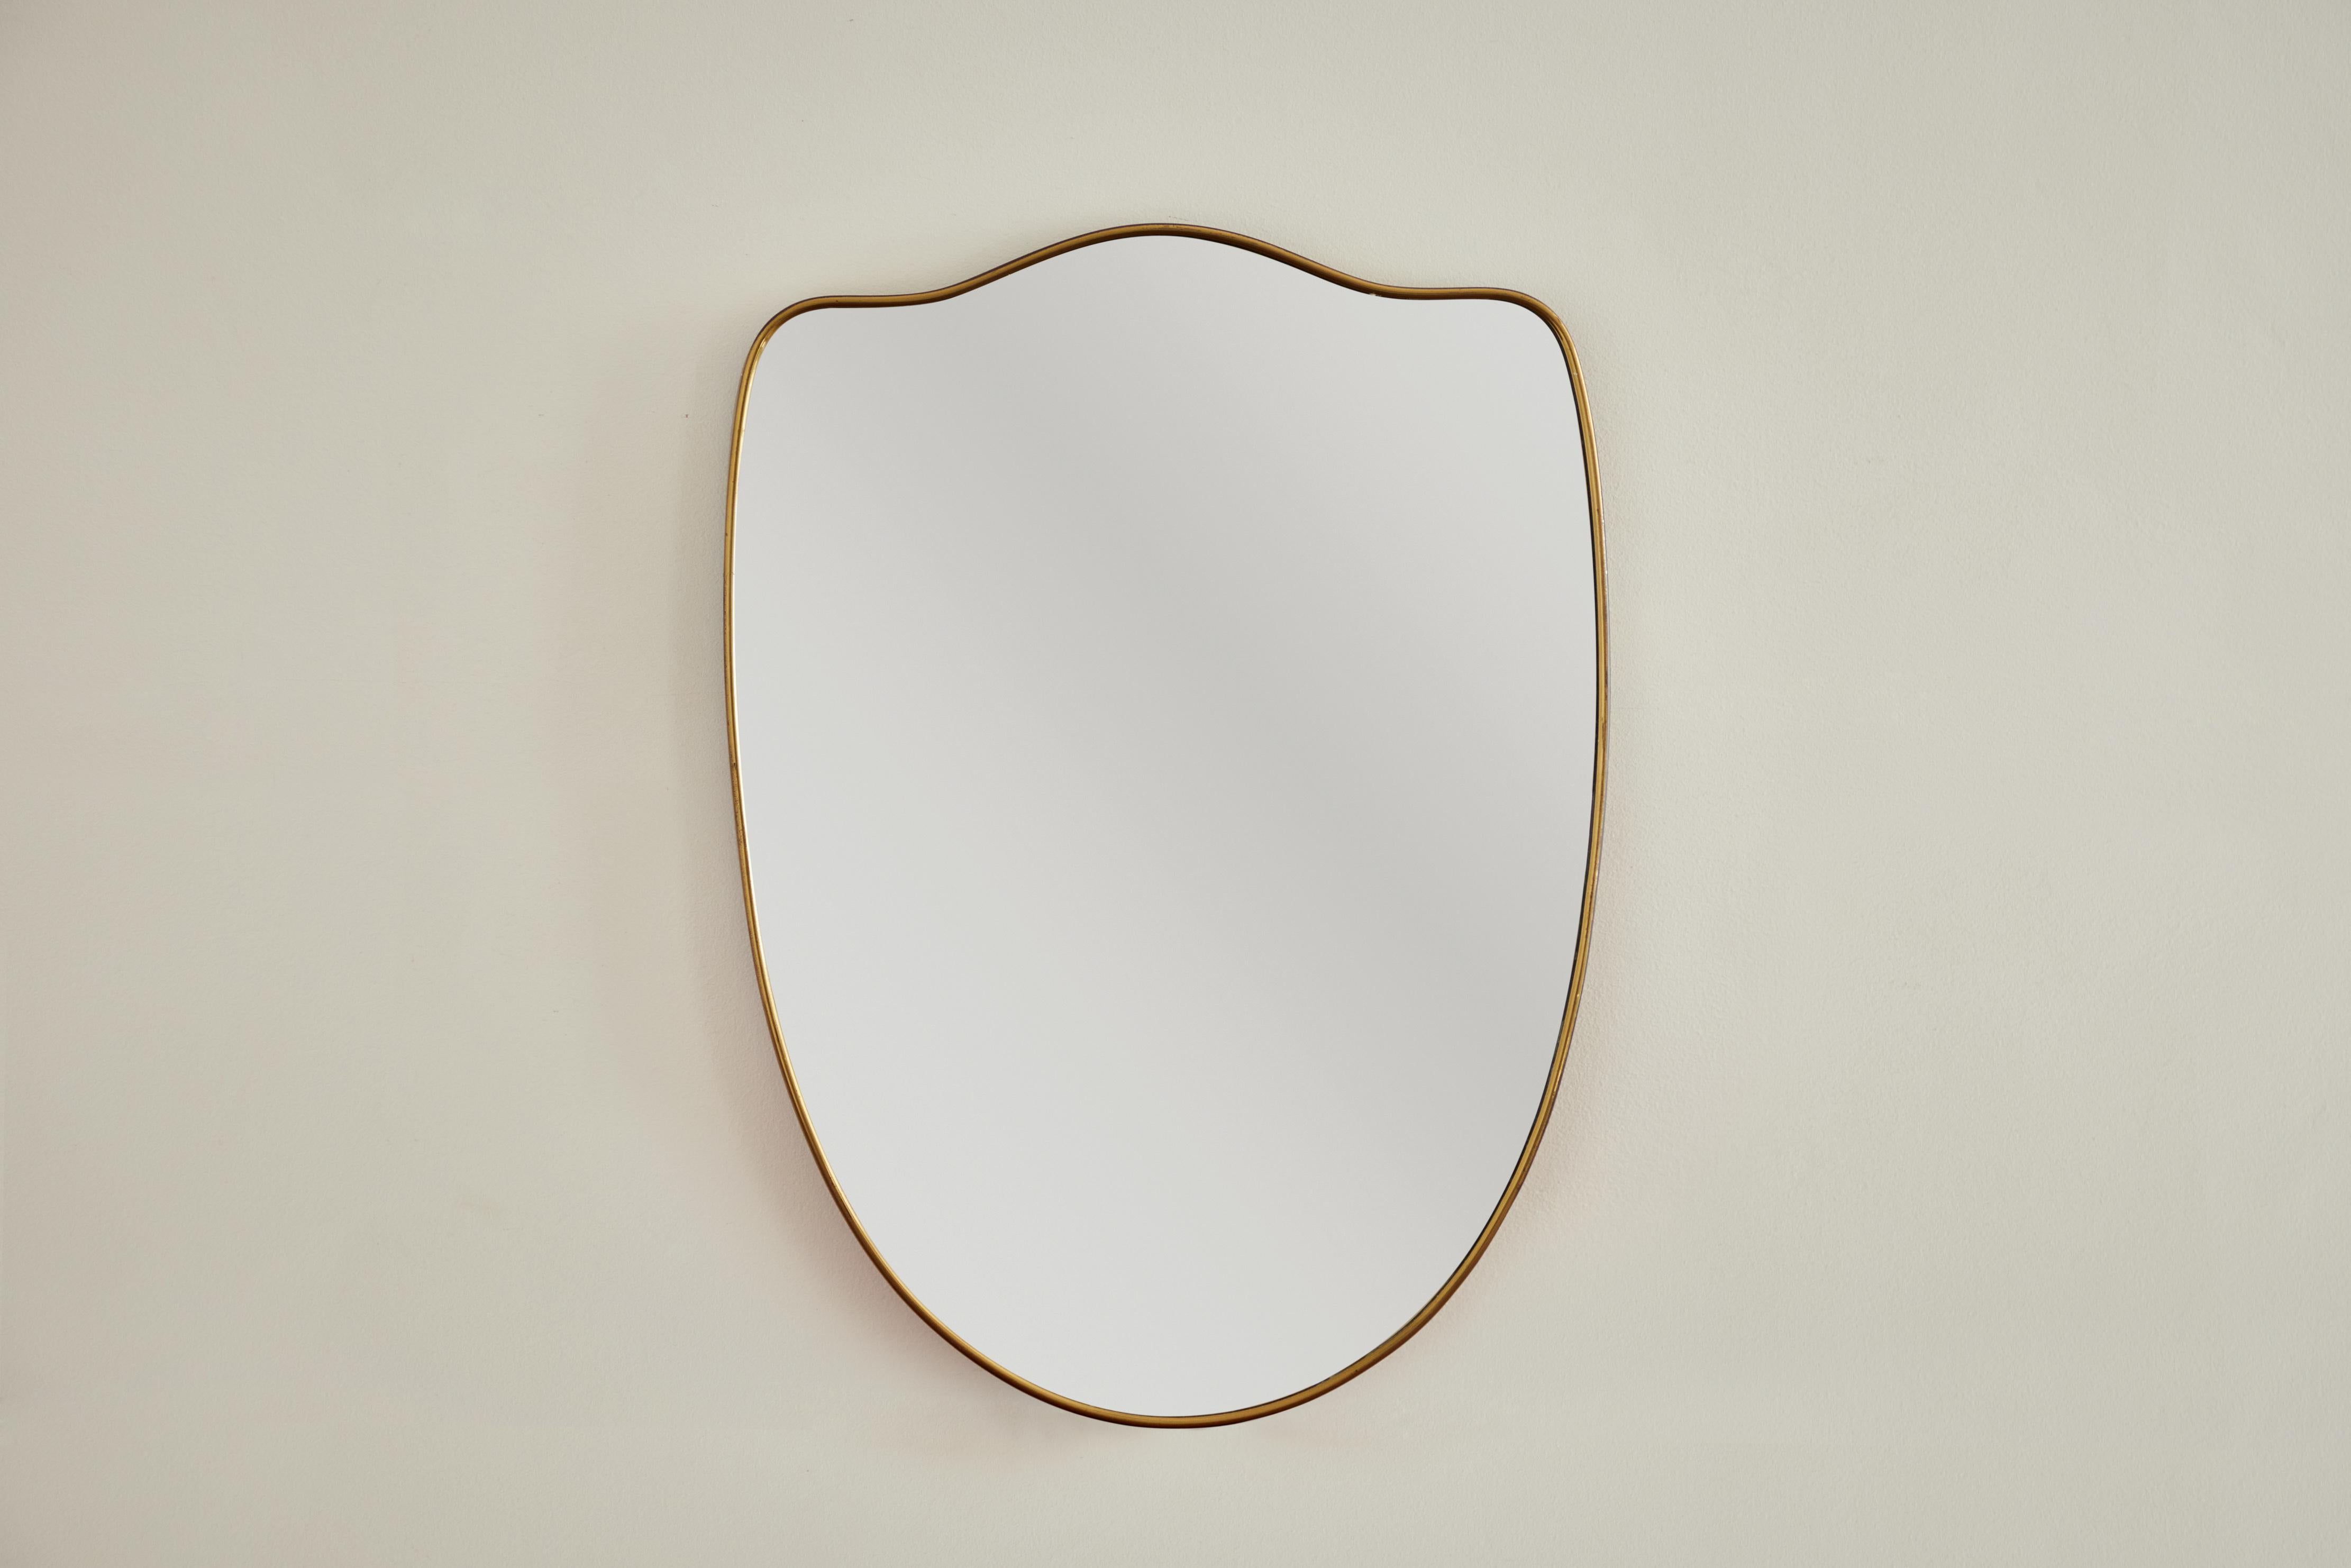 Italian patinated brass framed wall mirror. Made in Italy circa 1960s.